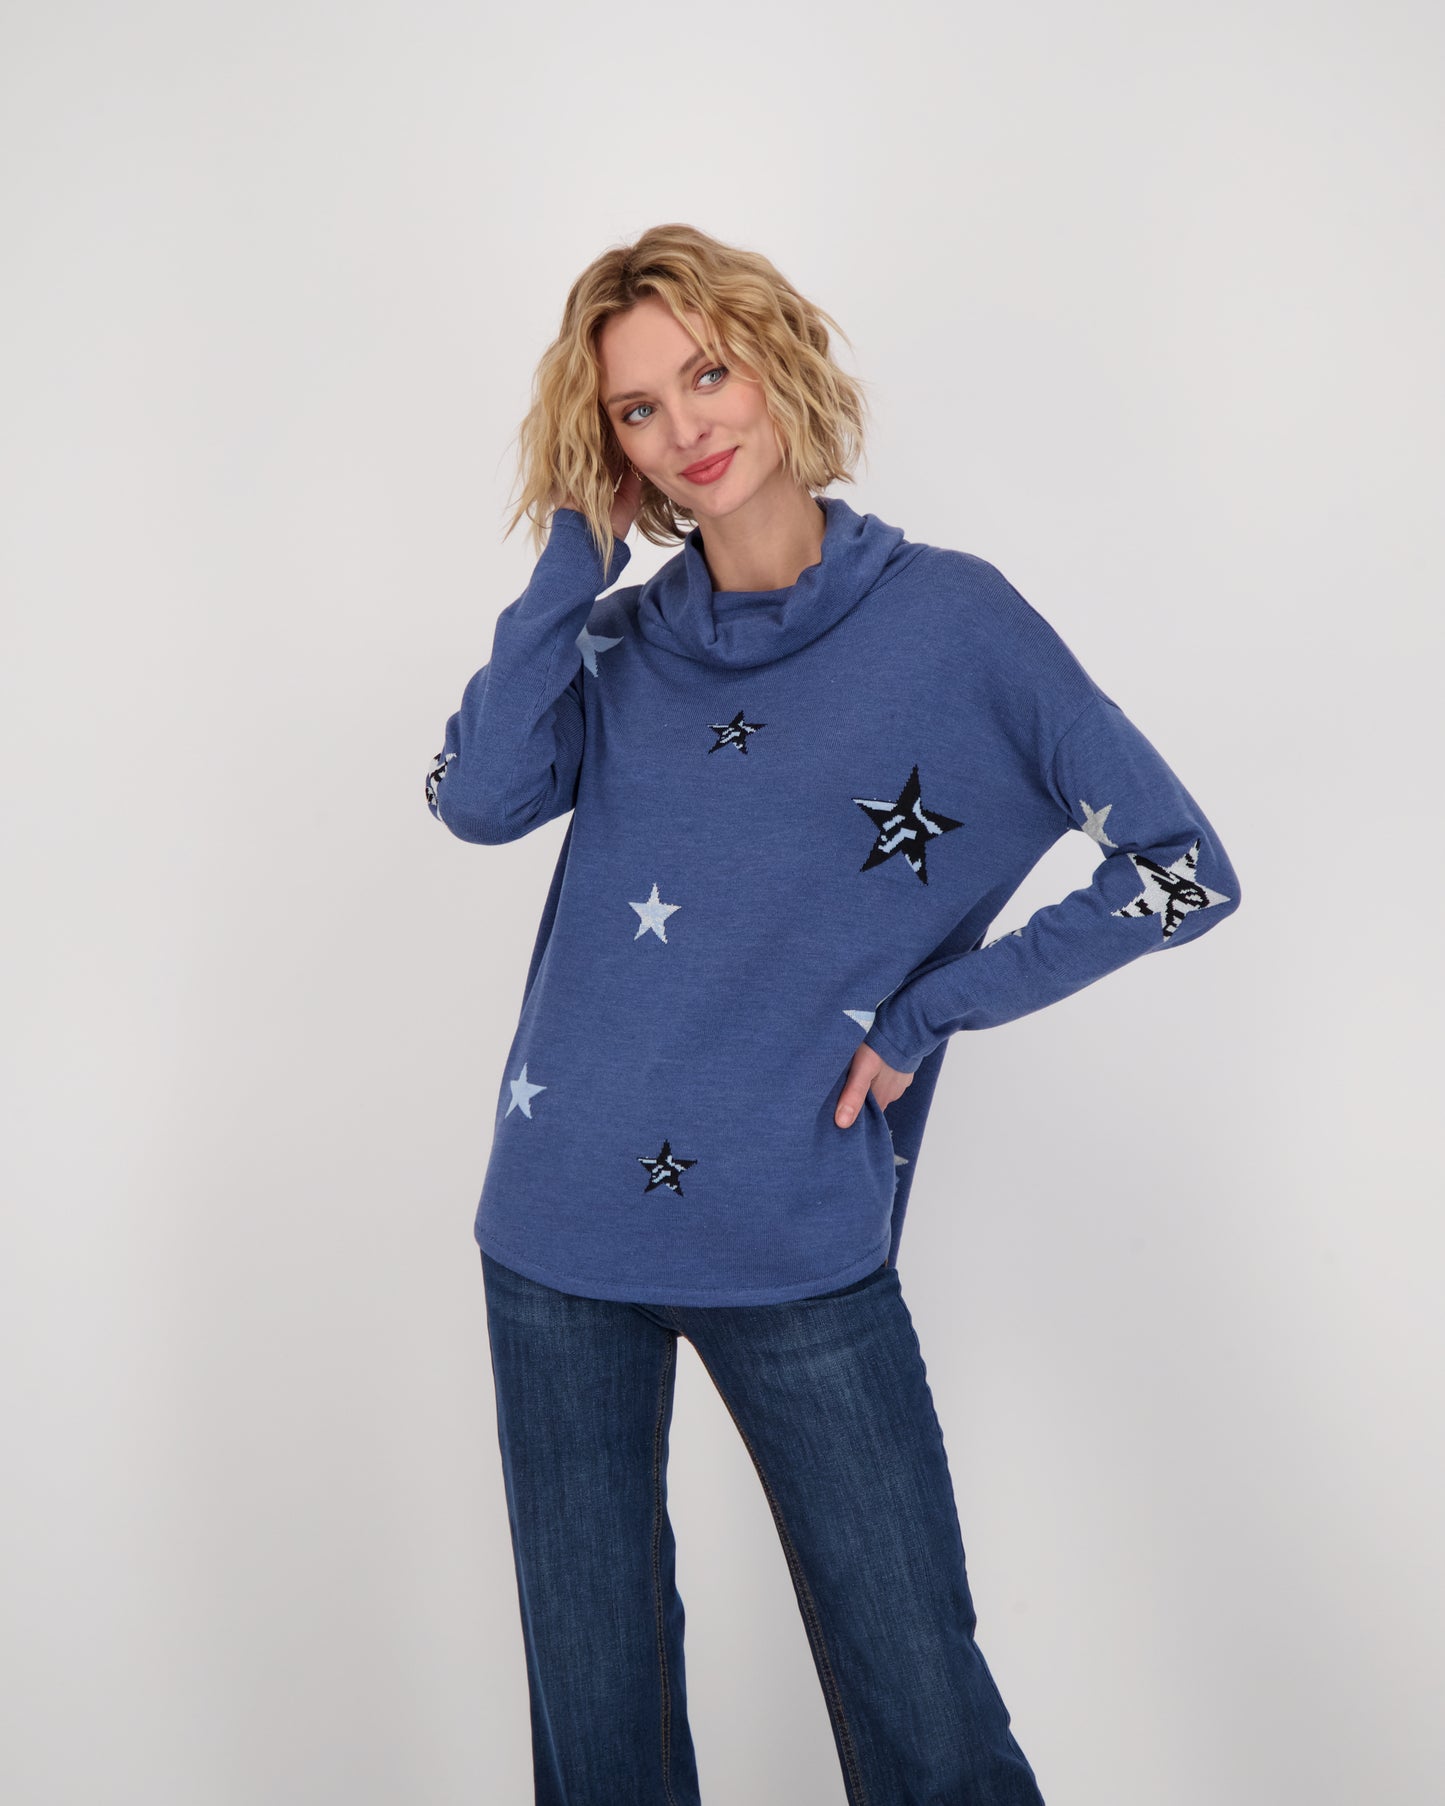 Blue Stars Sweater With Back Tie-Up